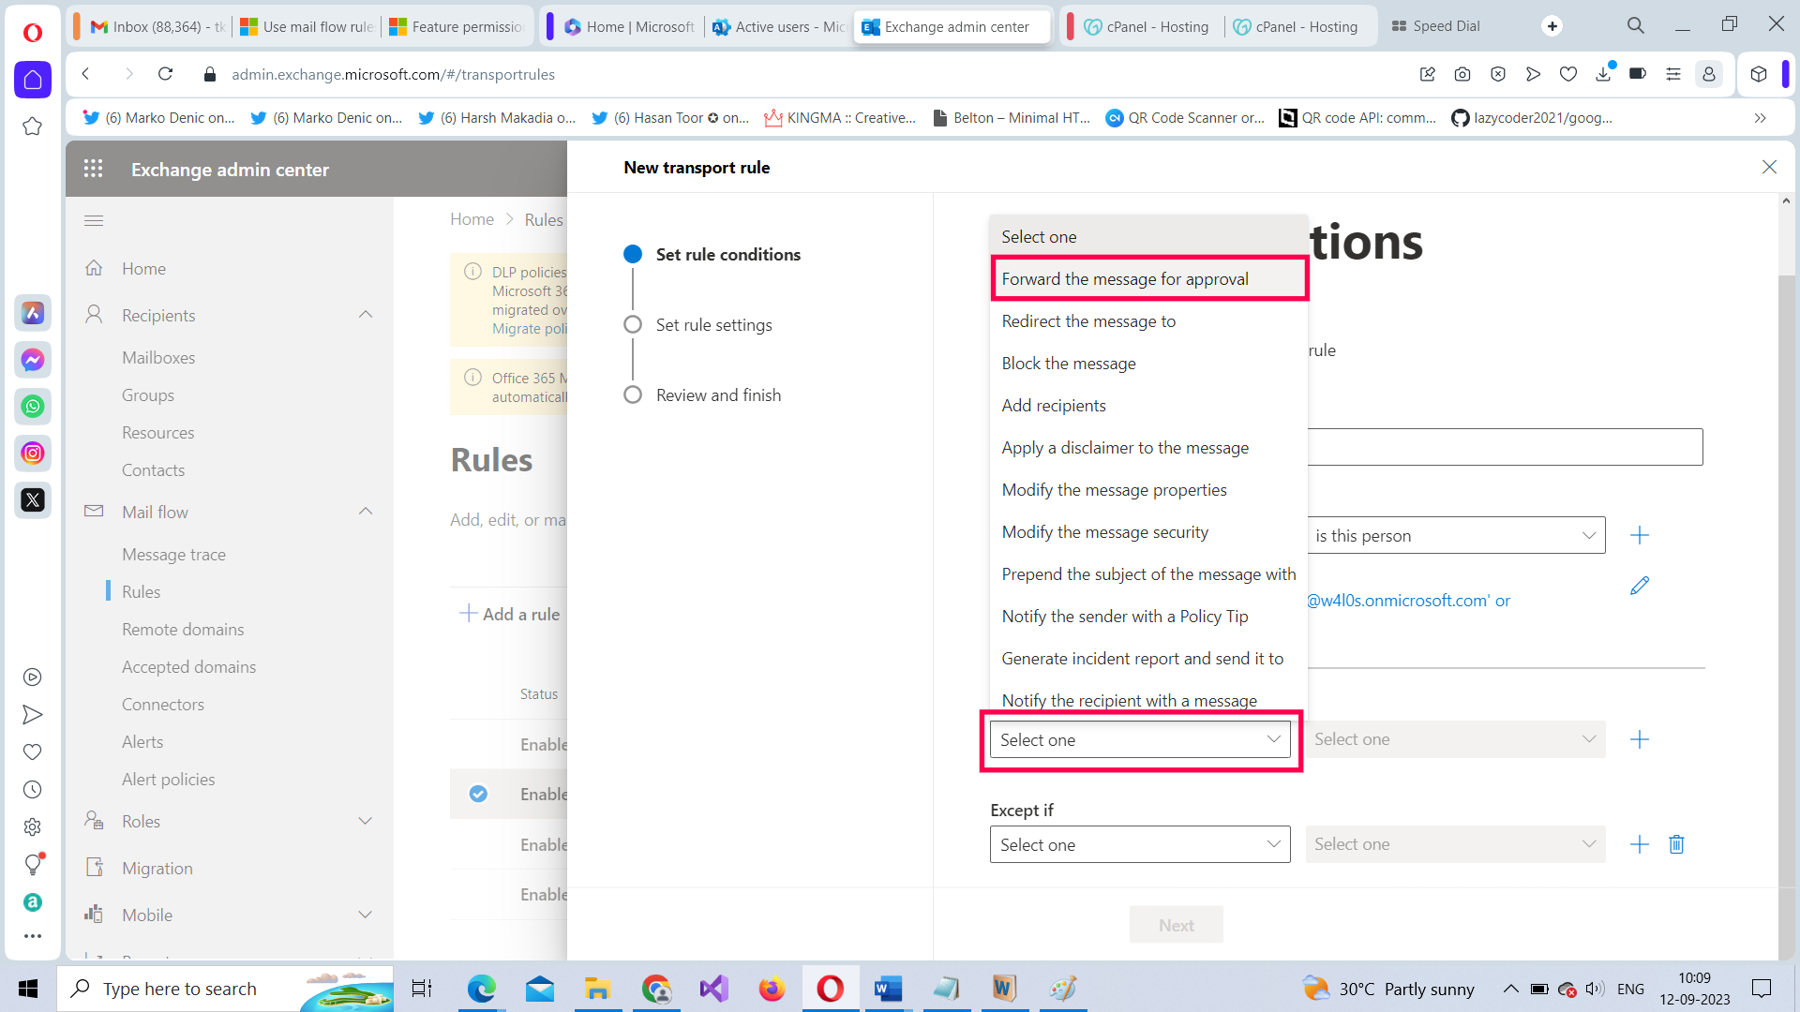 This screenshot shows how you can set the actions for the Microsoft 365 mail flow rule in the Microsoft 365 Exchange admin center. Forward the message for approval is highlighted.